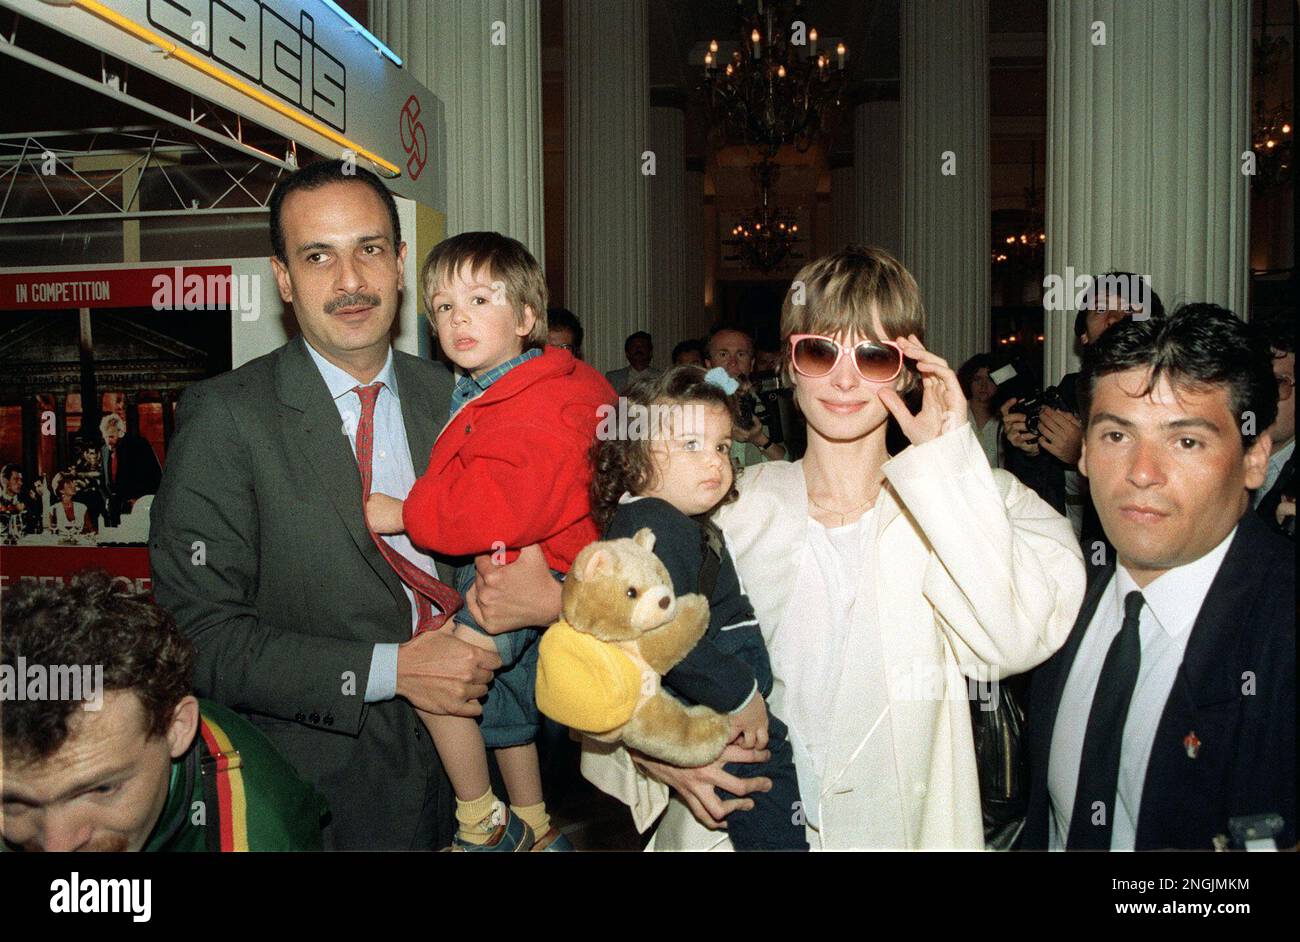 Actress Nastassja Kinski arrives with her husband, Egyptian film producer Ibrahim Moussa, and their children, Aljocha and Sonja-Leila-Sarah, in Cannes, May 17th, 1987, as the French riviera resort was hosting the annual film festival. ( AP photo/ Pierres Gleizes) Stockfoto